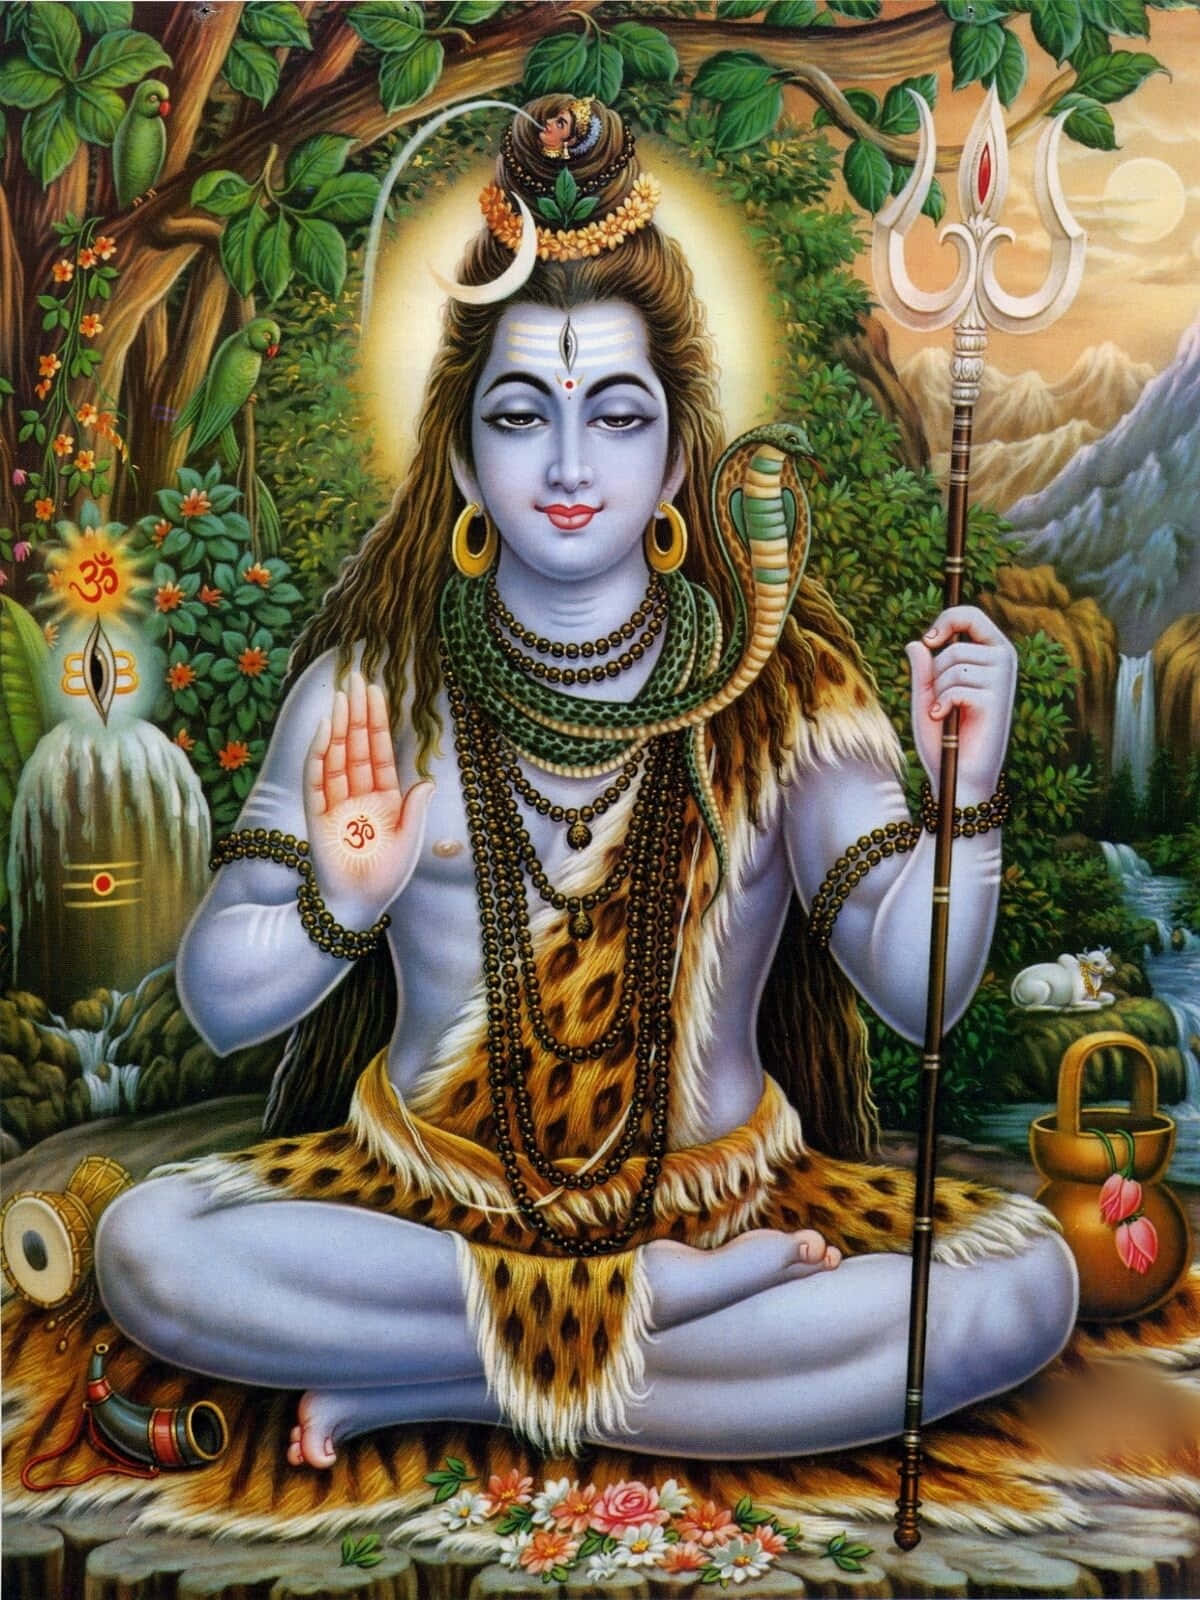 Lord Shiva, The Destroyer of Evil